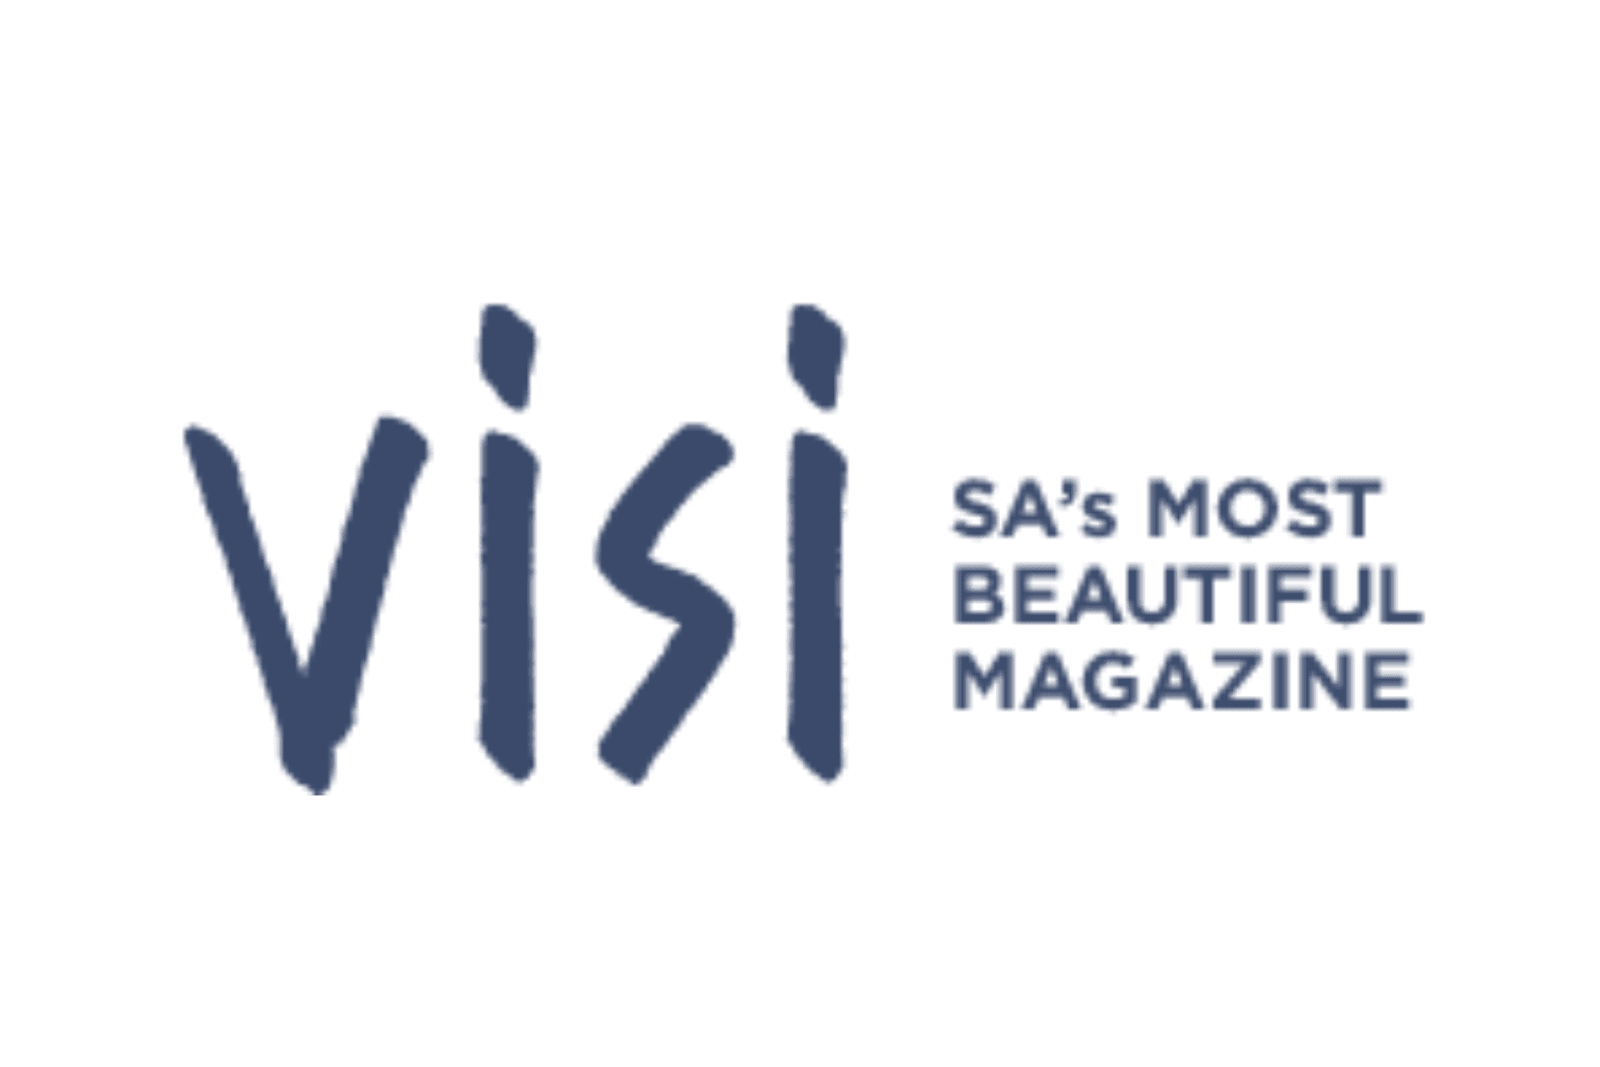 The Secret Love Project NPO featured in Visi Magazine